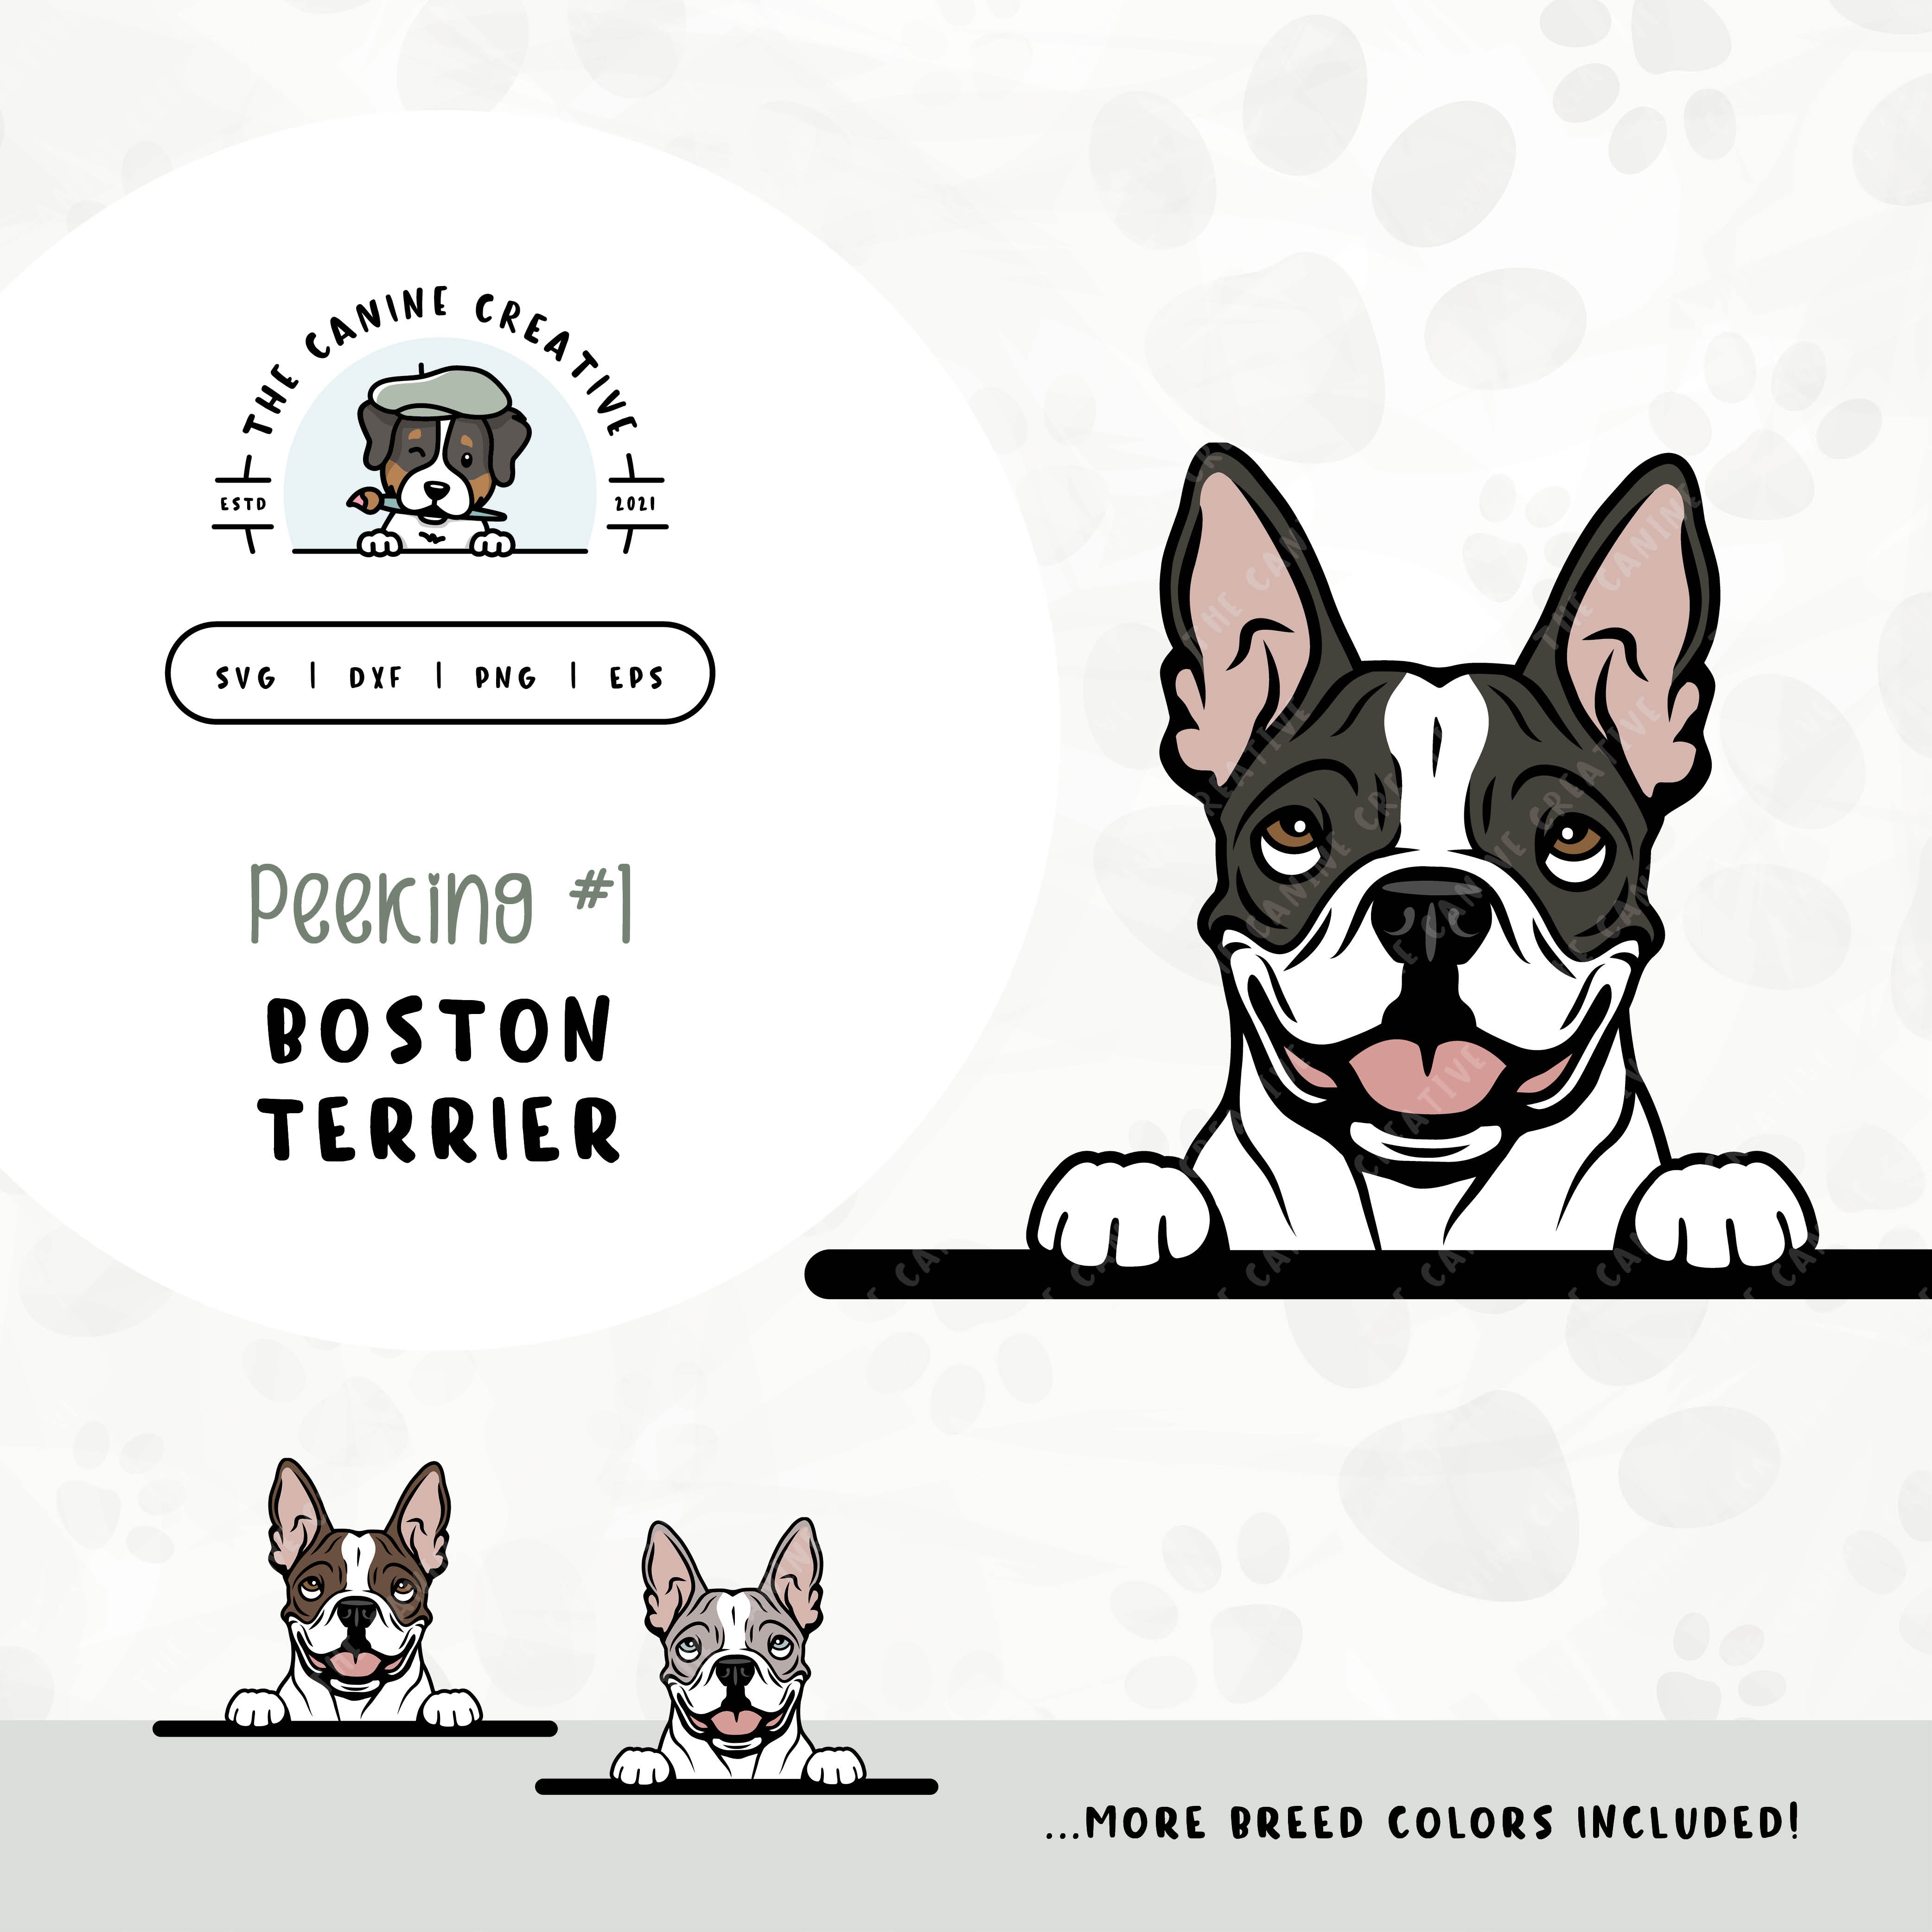 This illustrated design features a peeking Boston Terrier. File formats include: SVG, DXF, PNG, and EPS.